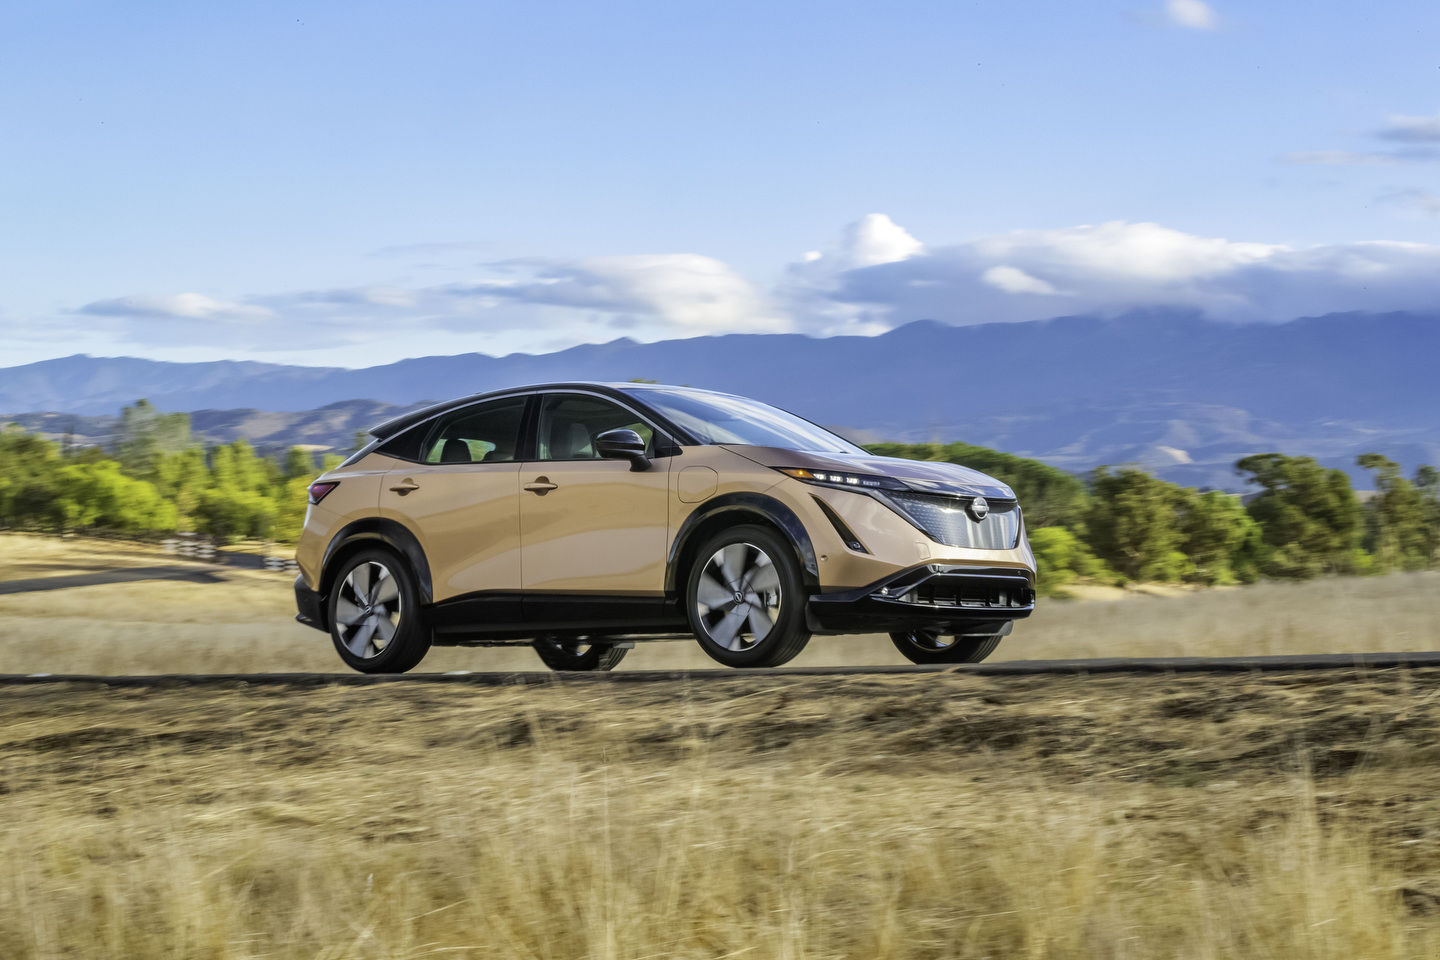 The Fundamentals of Nissan Electric Cars: What New Drivers Should Know